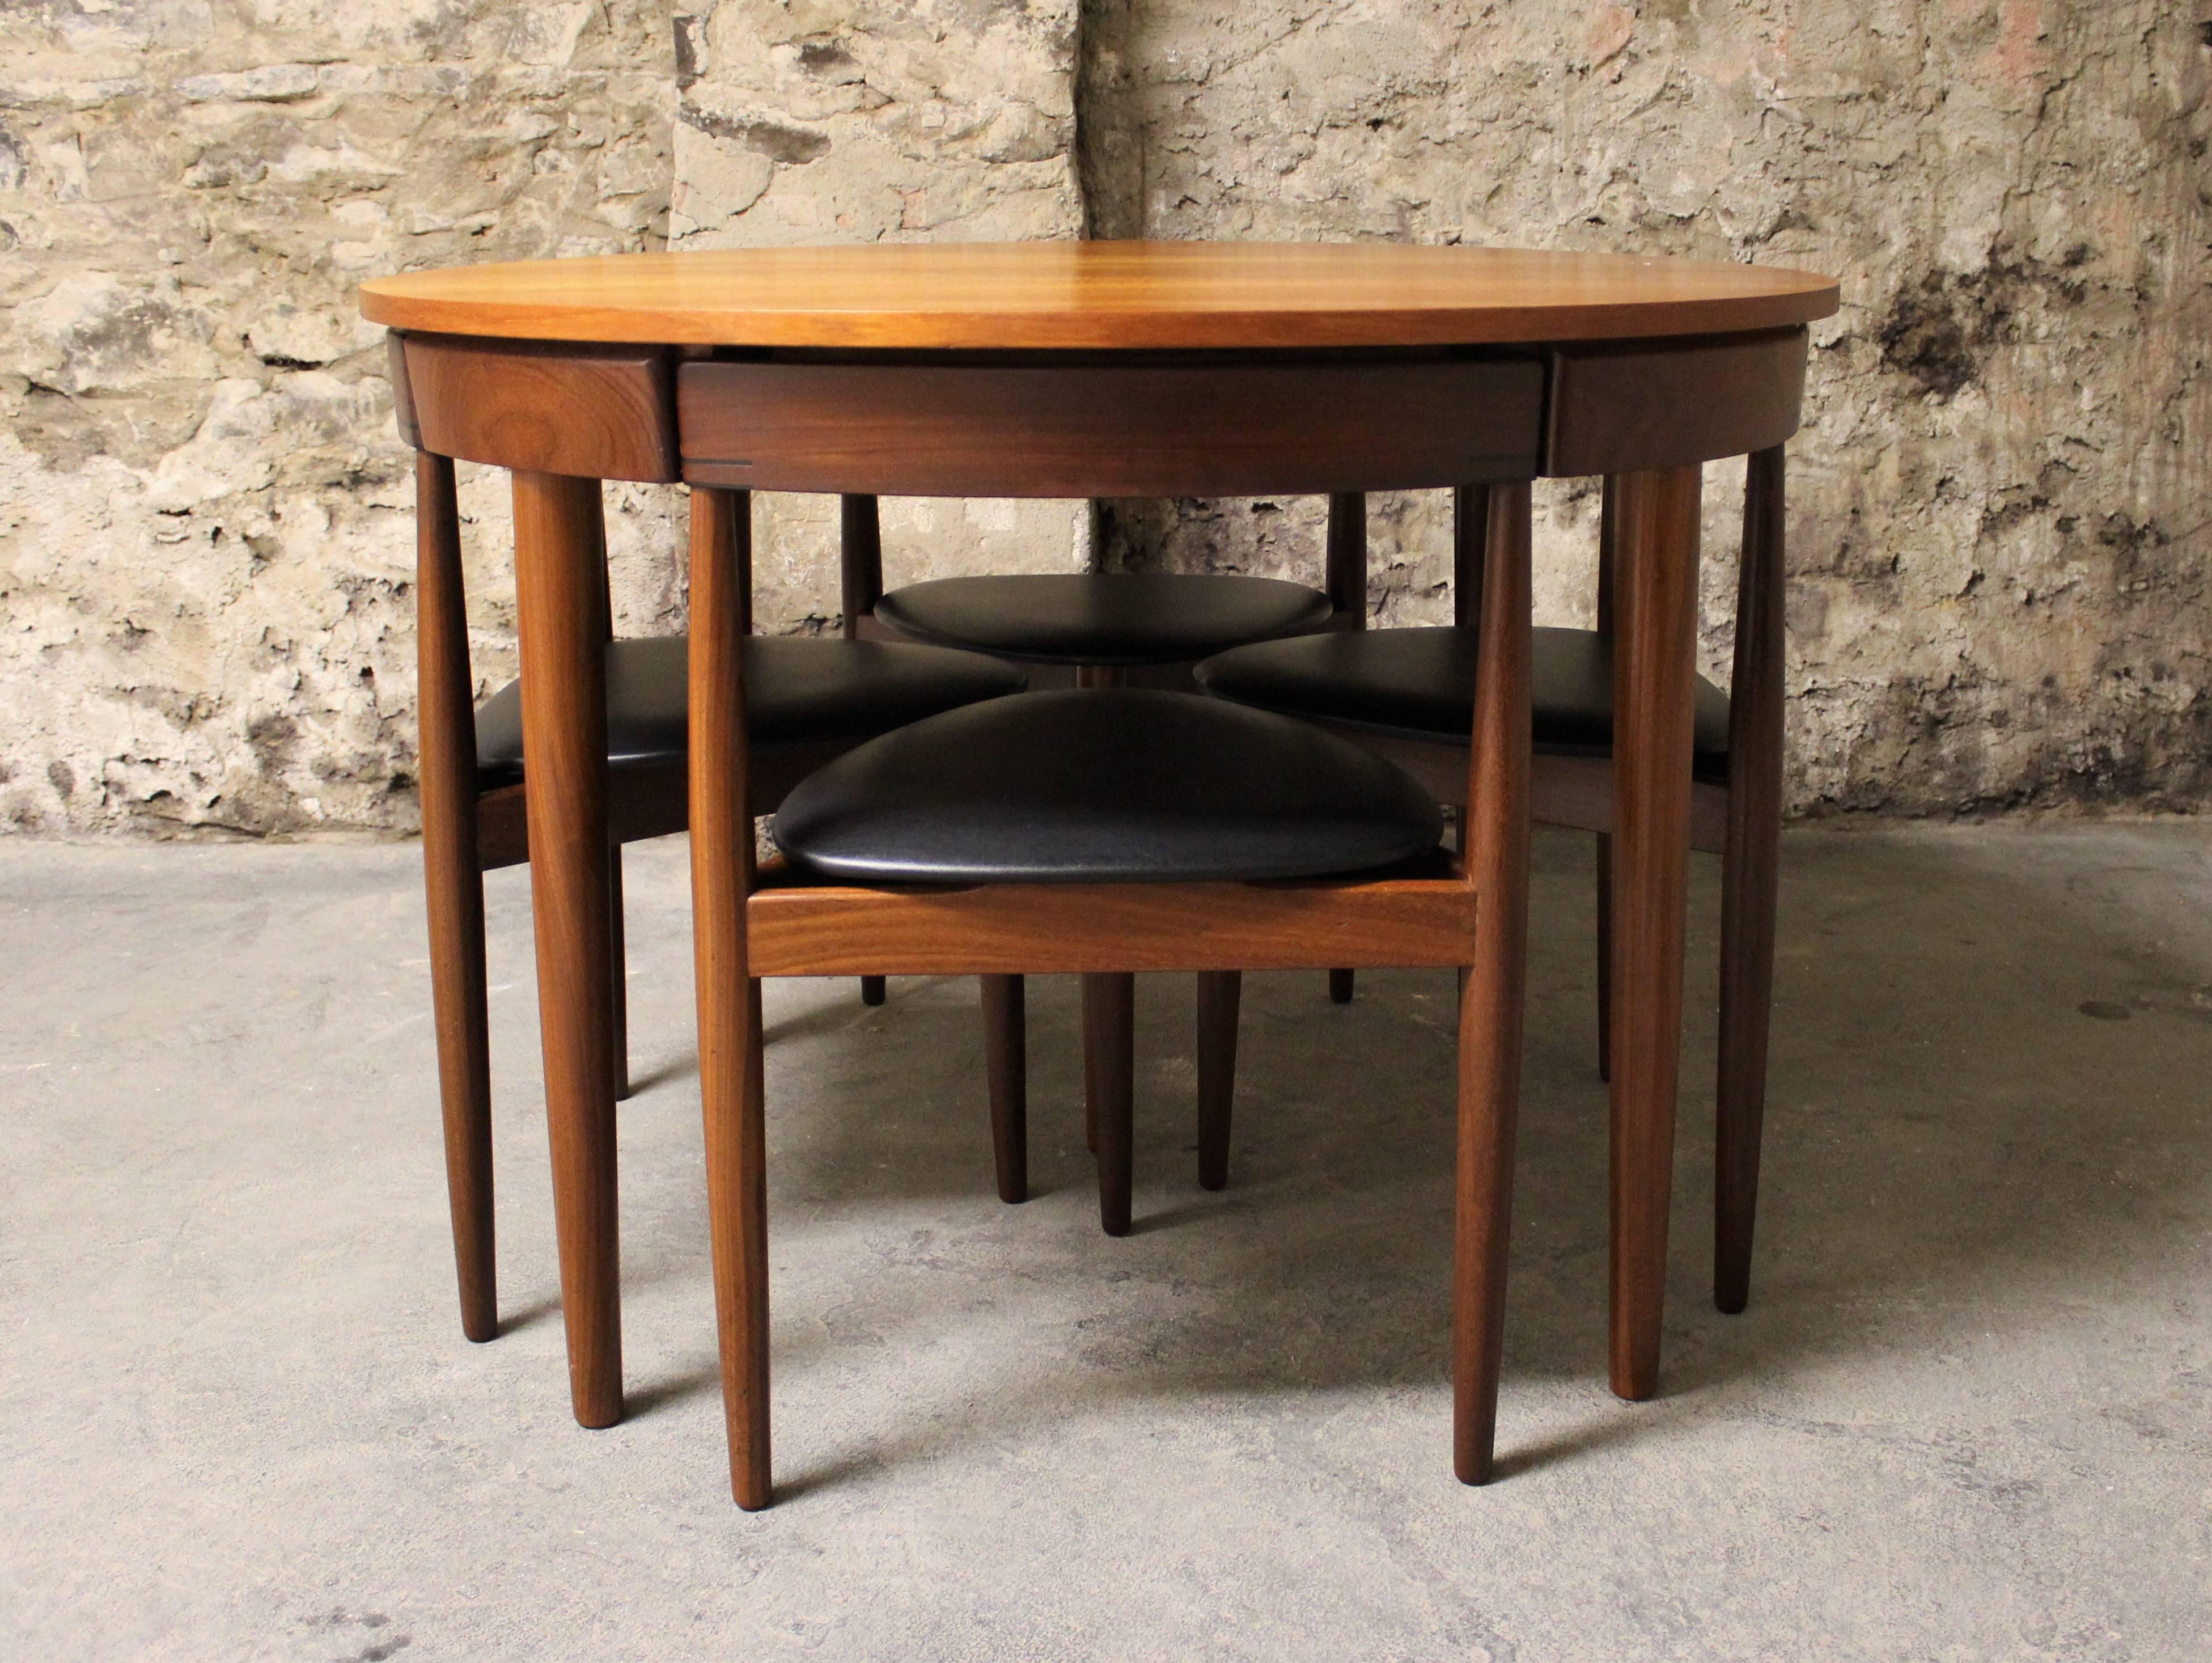 This teak Roundette model dining set, consisting of one extendable dining table and four chairs was designed by Hans Olsen, and manufactured by Frem Rojle in 1952. Made from teak, the table can be extended with a built in butterfly leaf. The